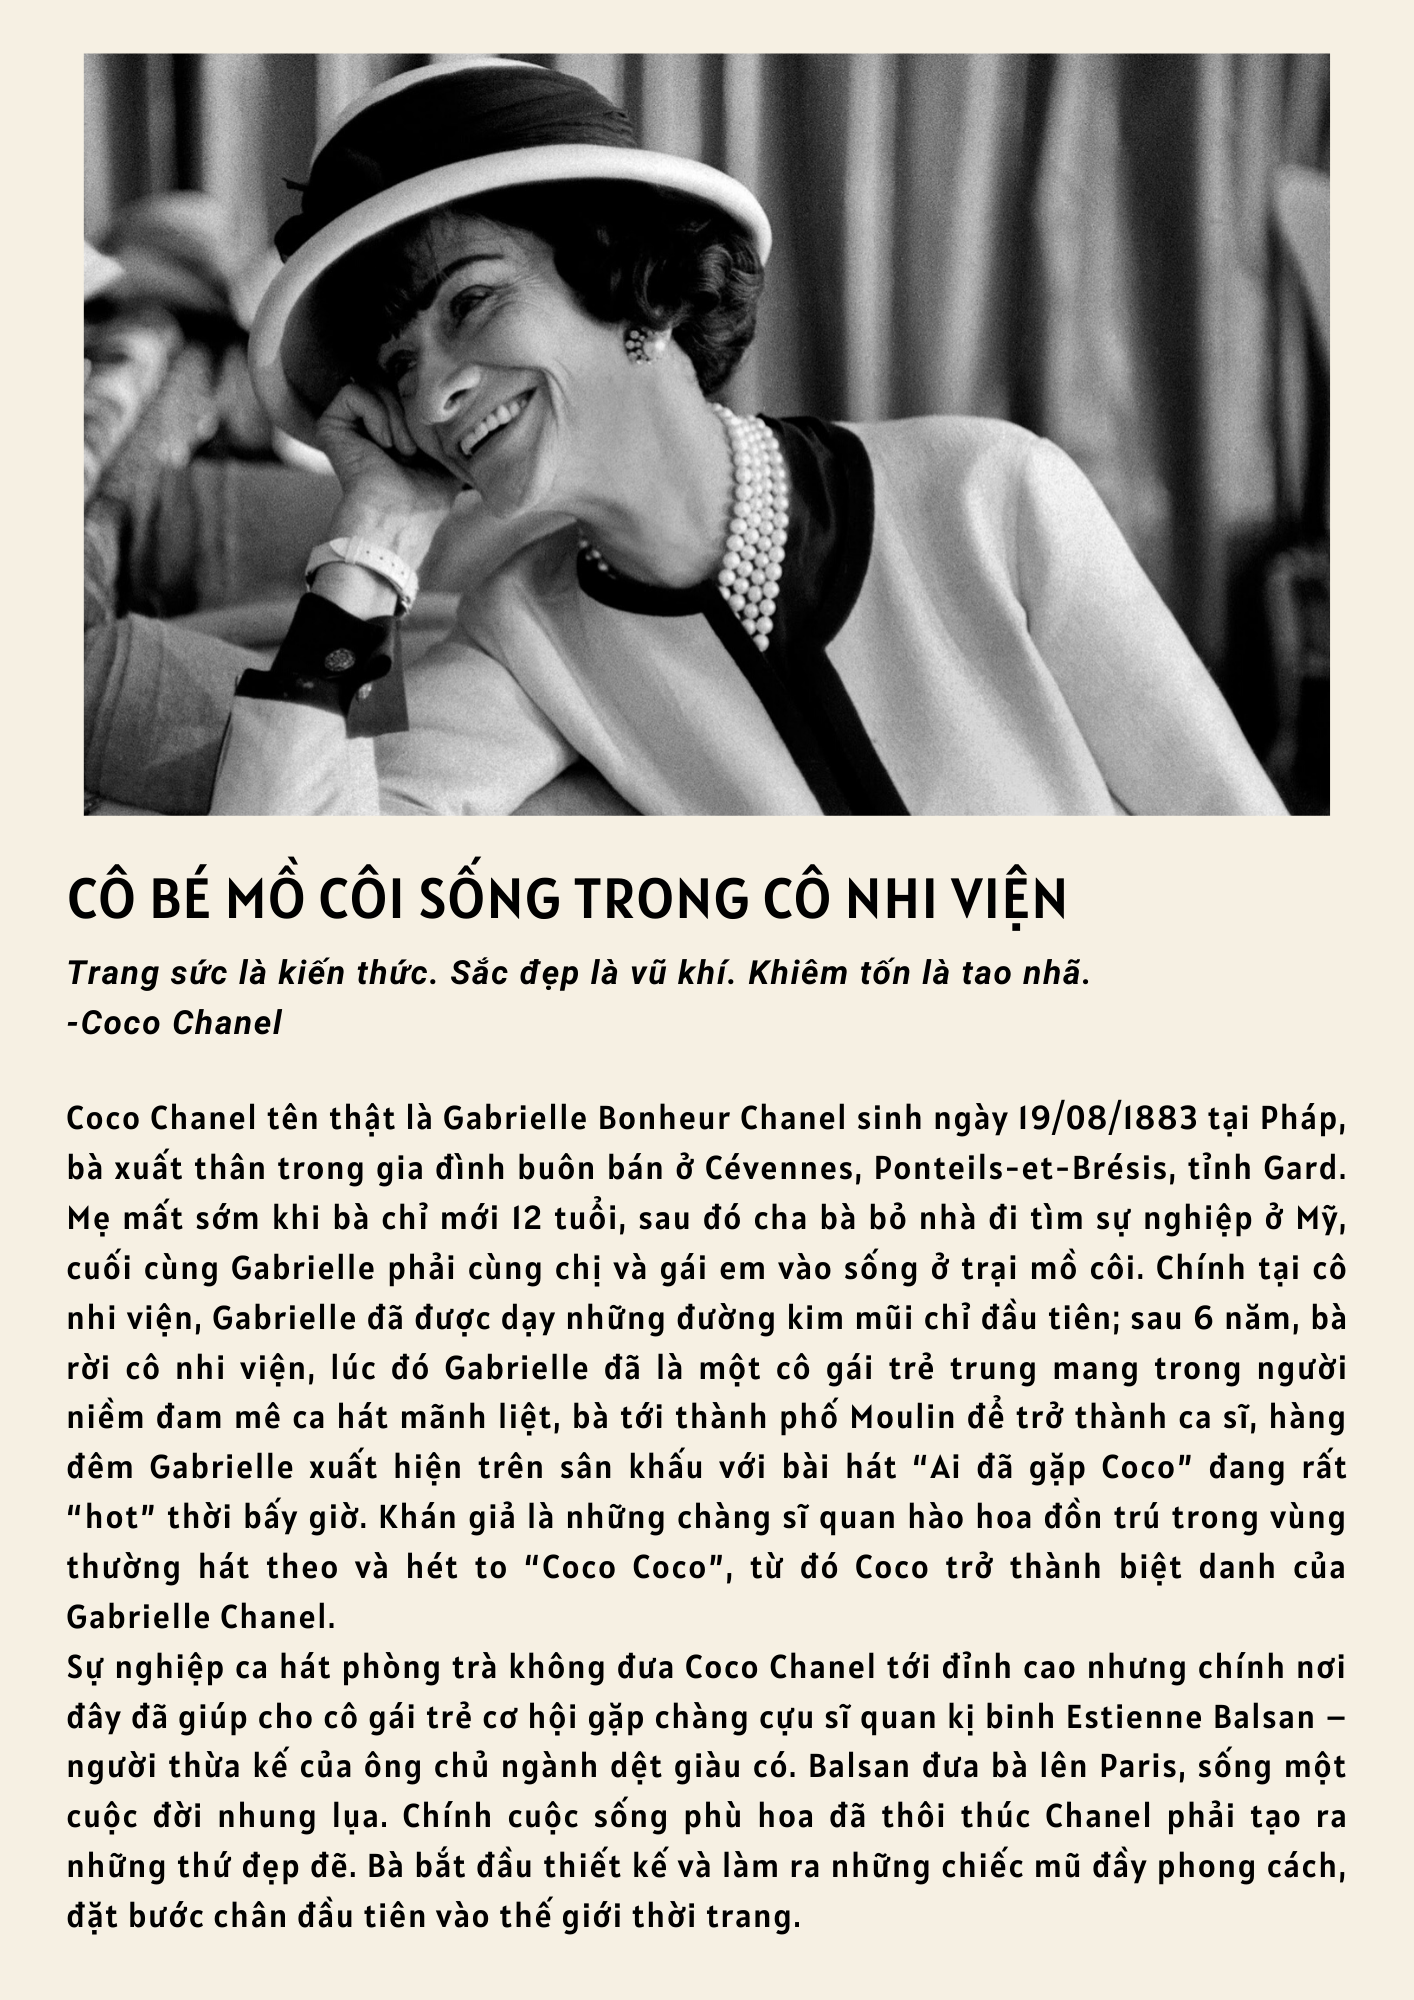 1/coco-chanel-nguoi-dinh-hinh-lai-thoi-trang-the-gioi-2_04072020110331320_0jdkxbvg.fig.png